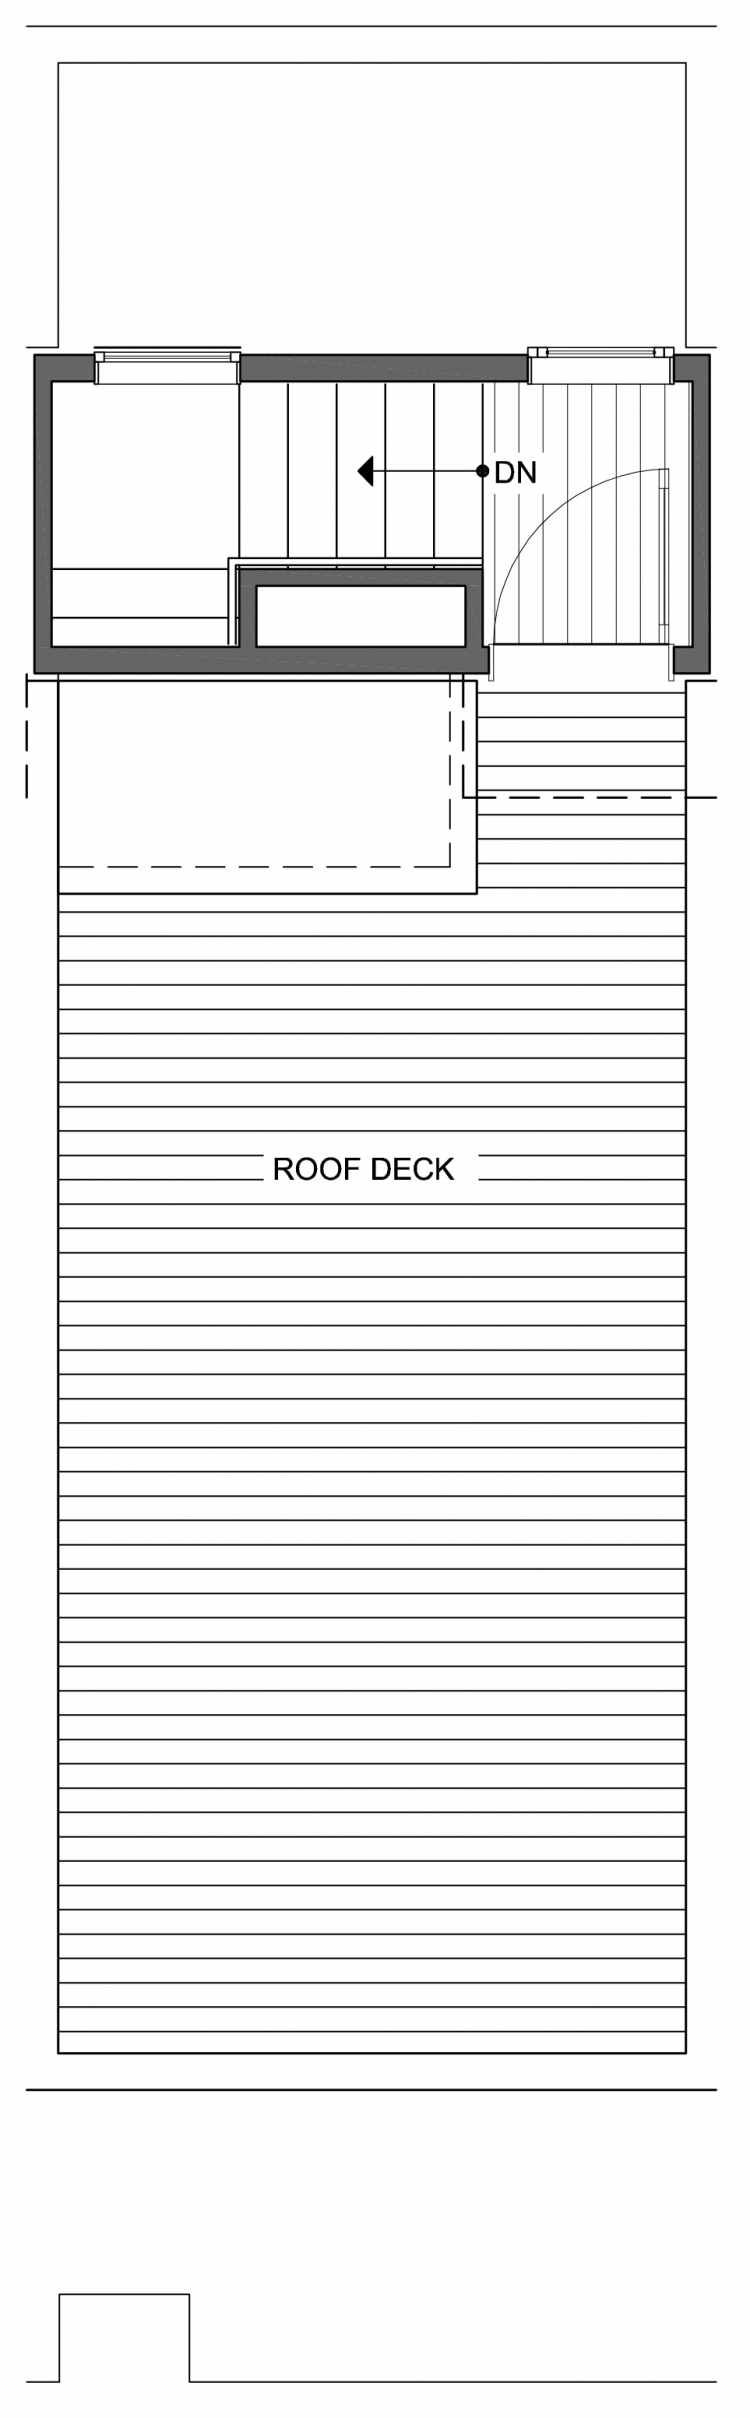 Roof Deck Floor Plan of 806B N 46th St, One of the Nino 15 East Townhomes by Isola Homes